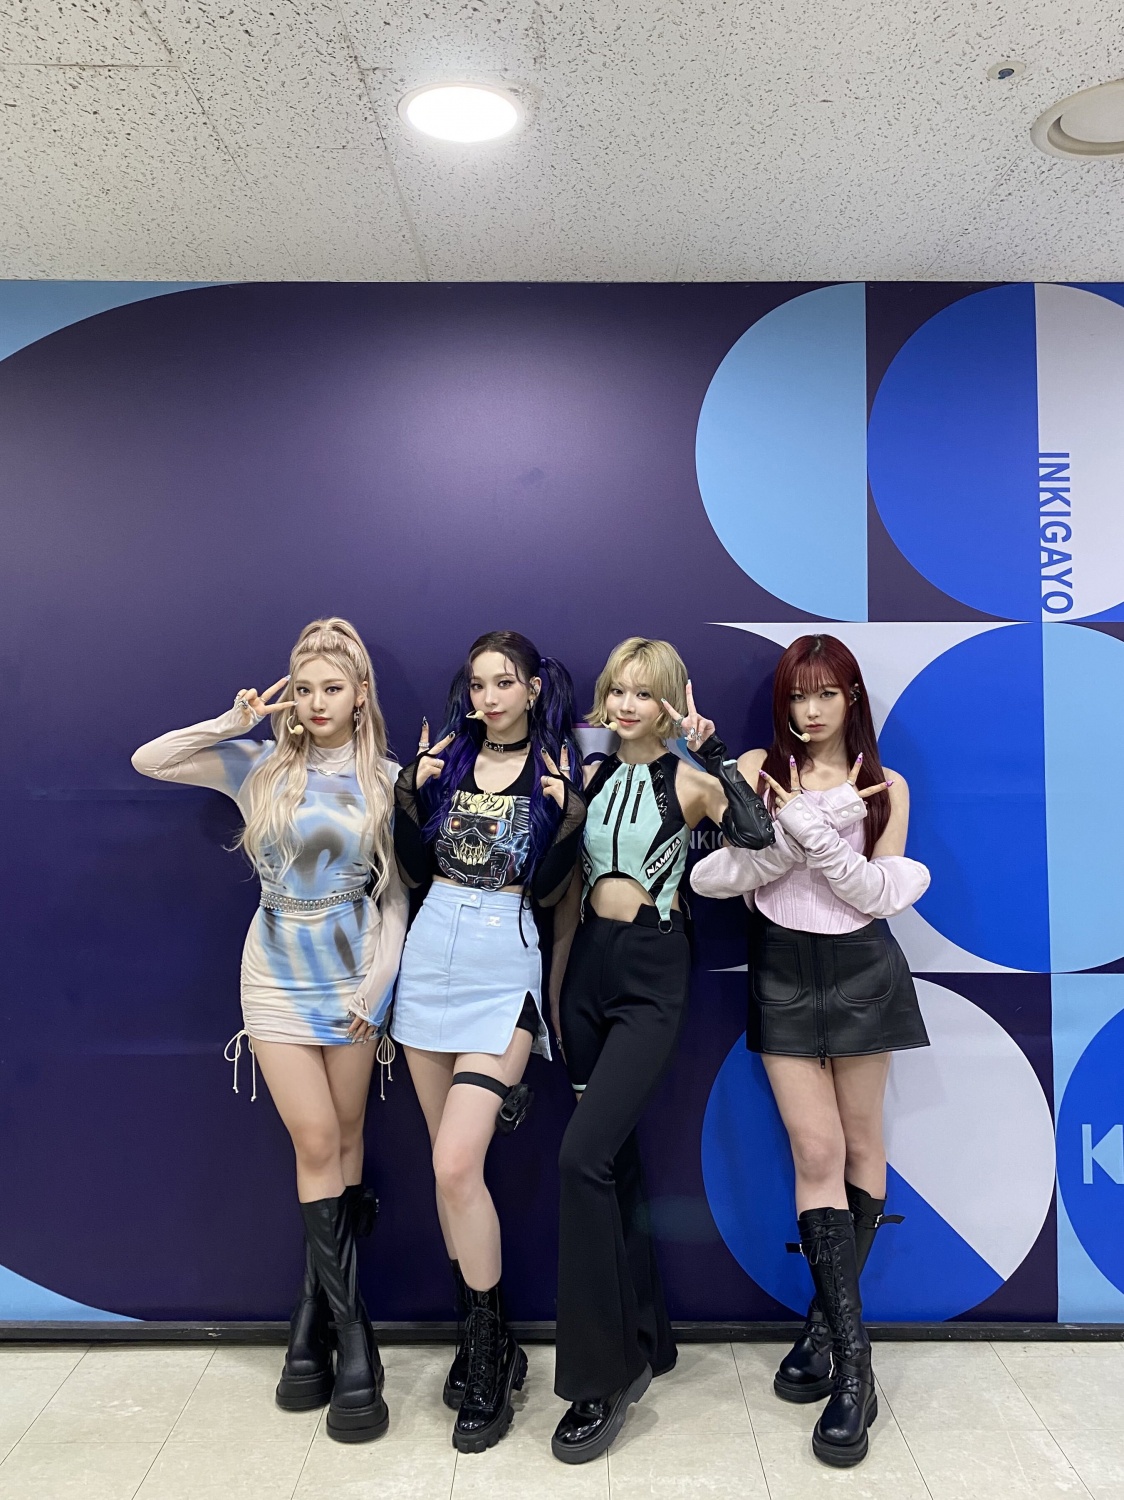 LOTUS World Tour 2023 With BLACKPINK, TWICE, More? Event's Alleged